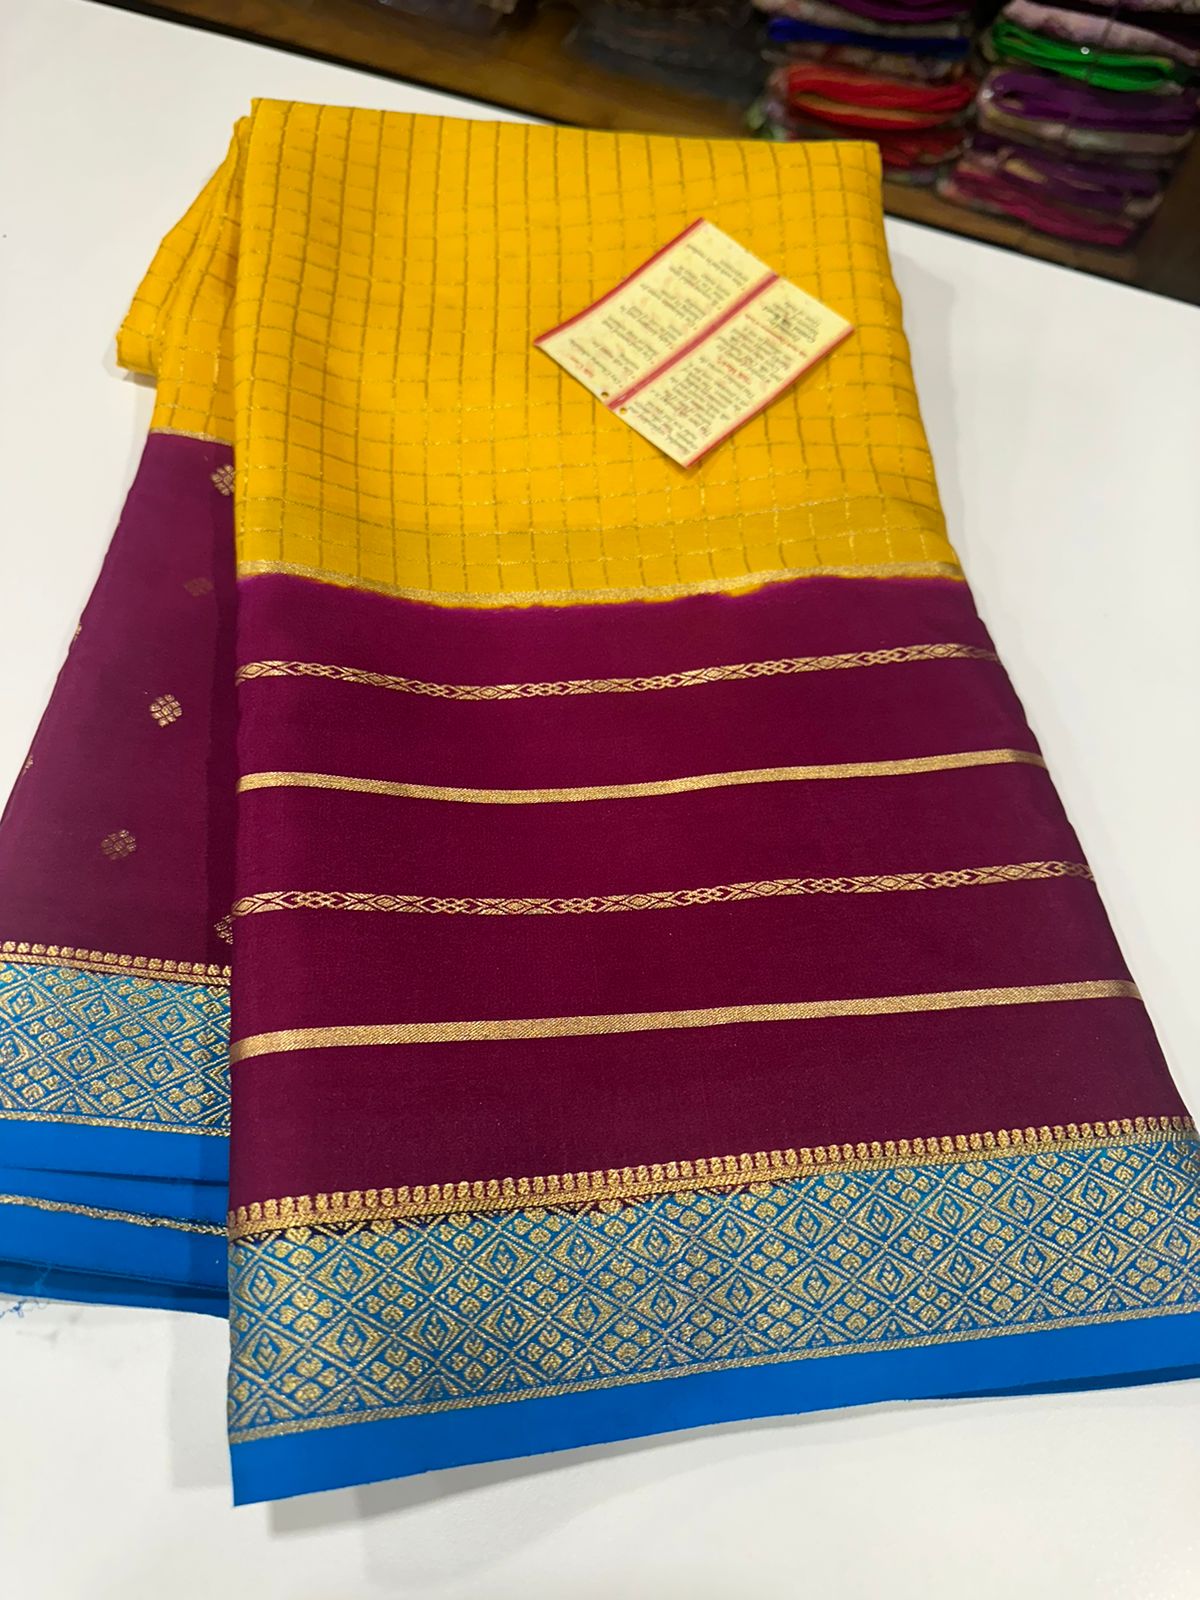 Pure Mysore silk sarees with 120 grm thickness and rich pallu, exclusive designs along with beautiful color combinations